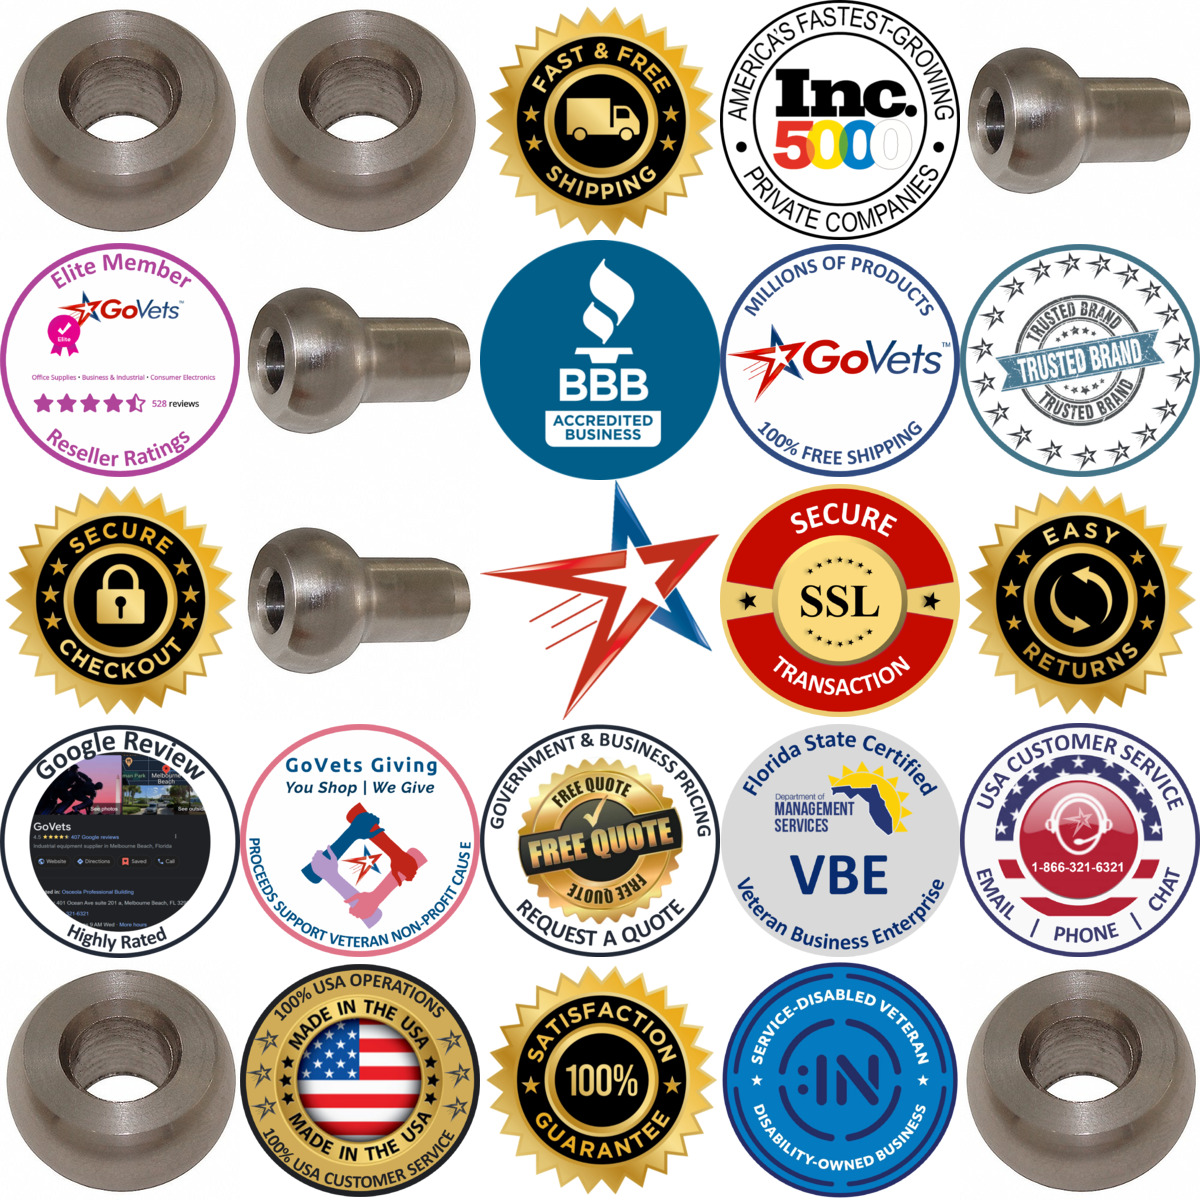 A selection of Ball and Dome Swage Fittings products on GoVets